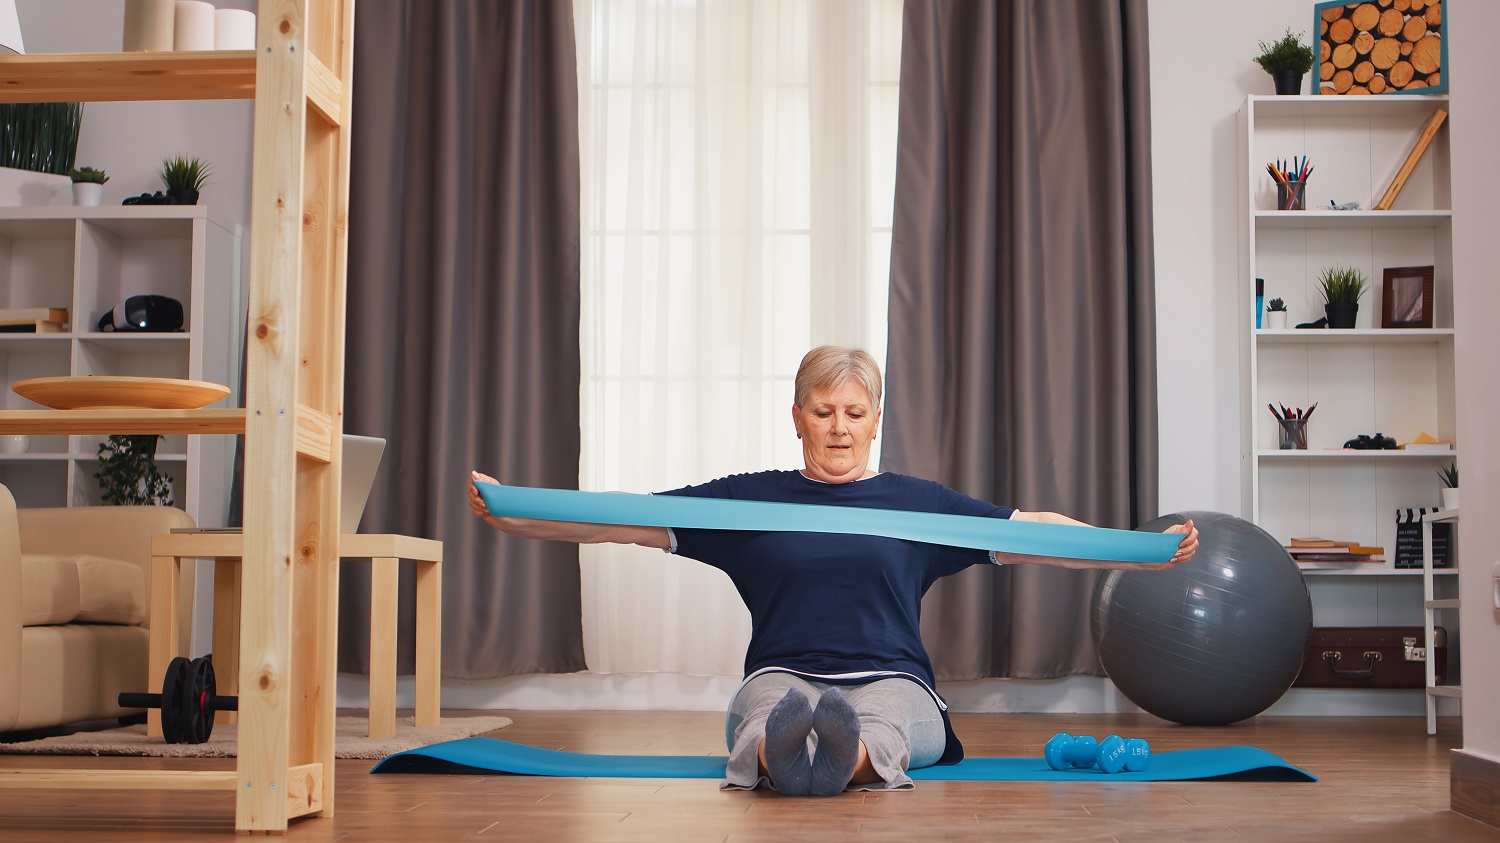 Effective Exercises for People With Limited Mobility